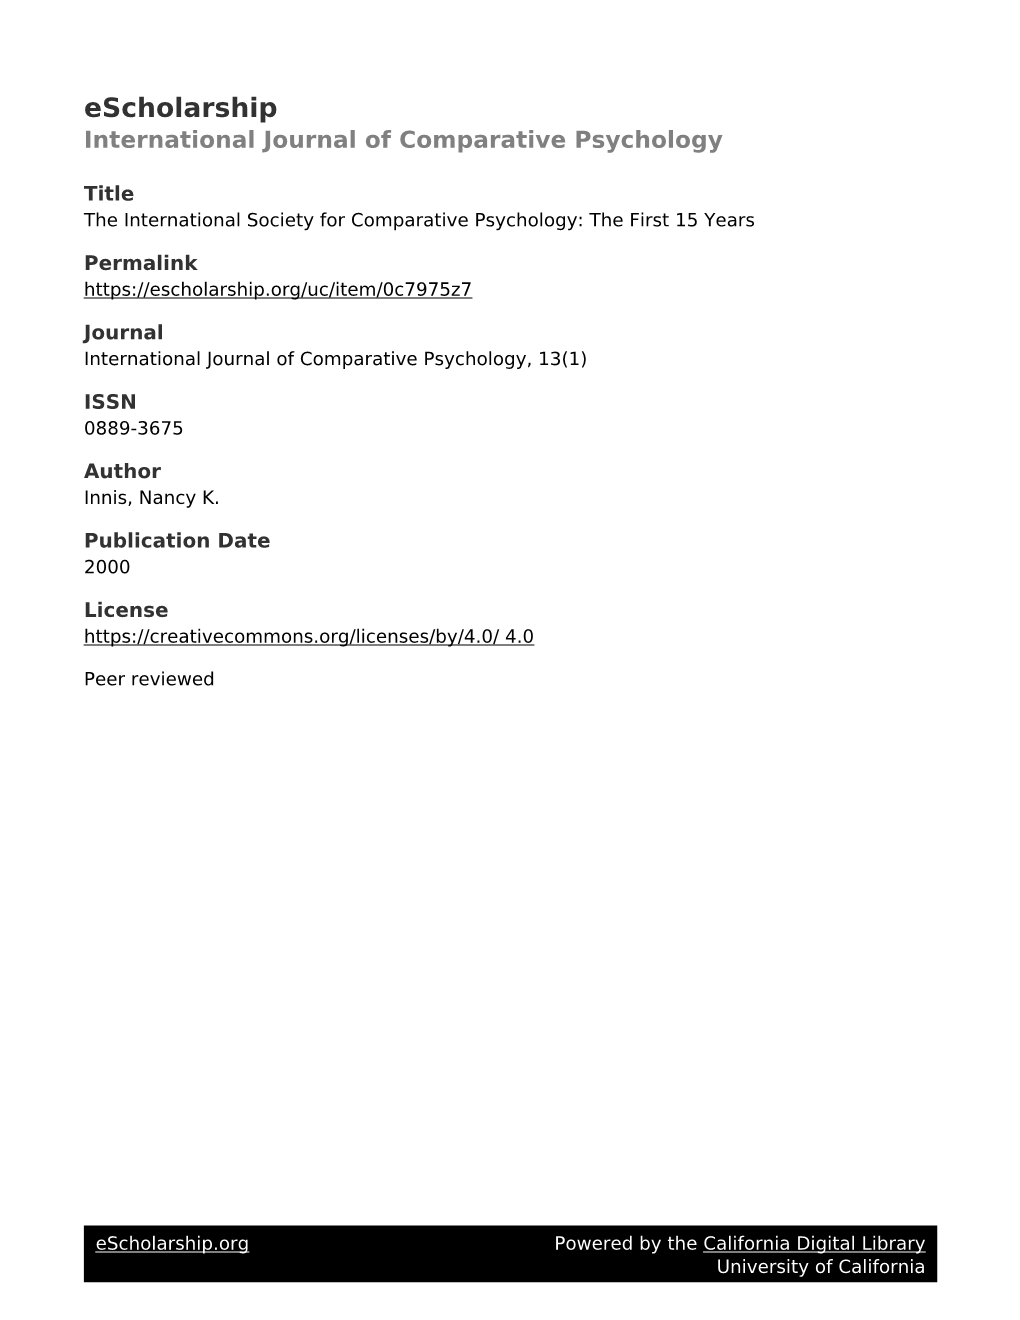 The International Society for Comparative Psychology: the First 15 Years